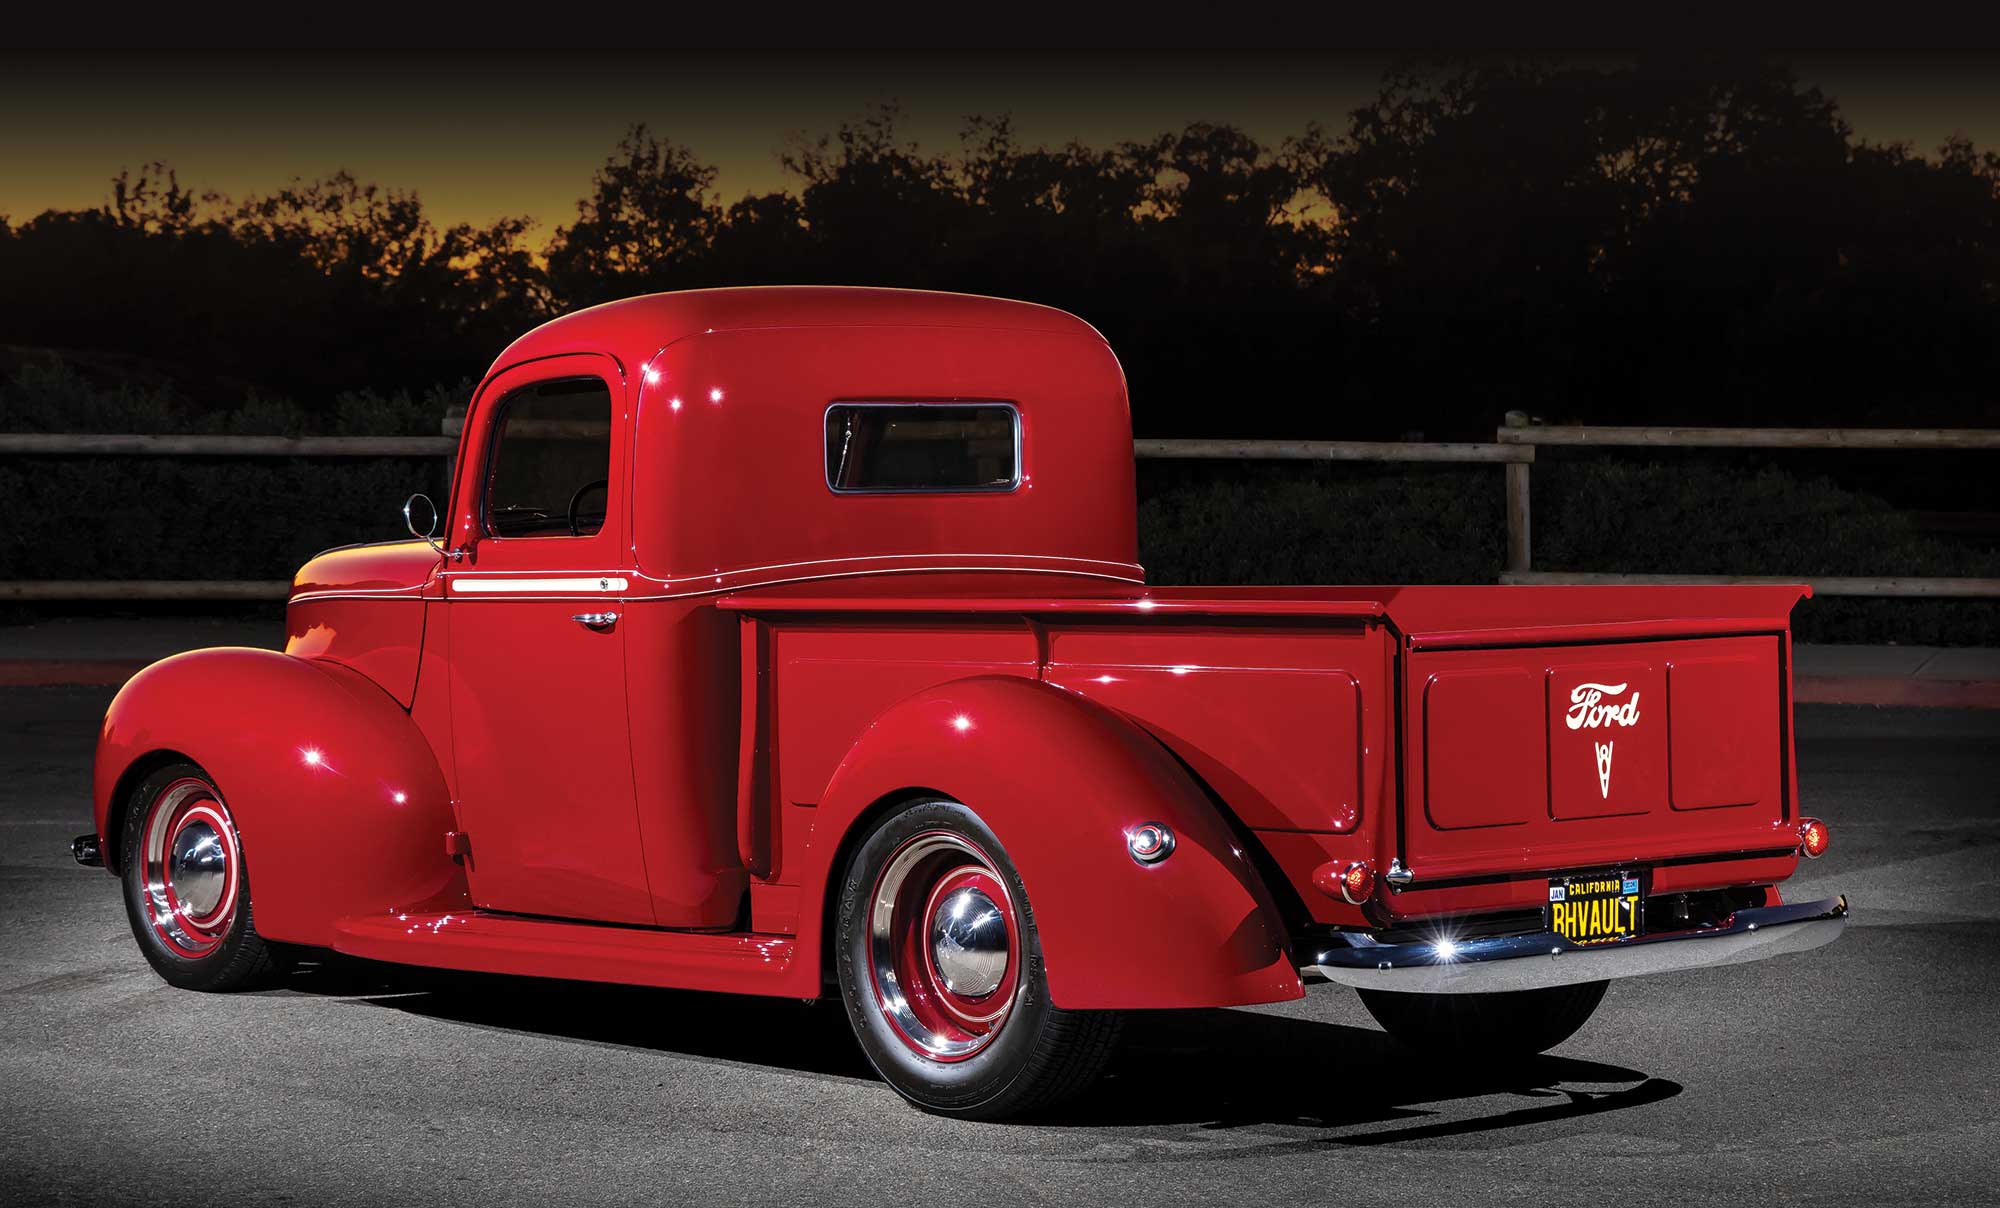 3/4 rear view of red '40 Ford Pickup truck